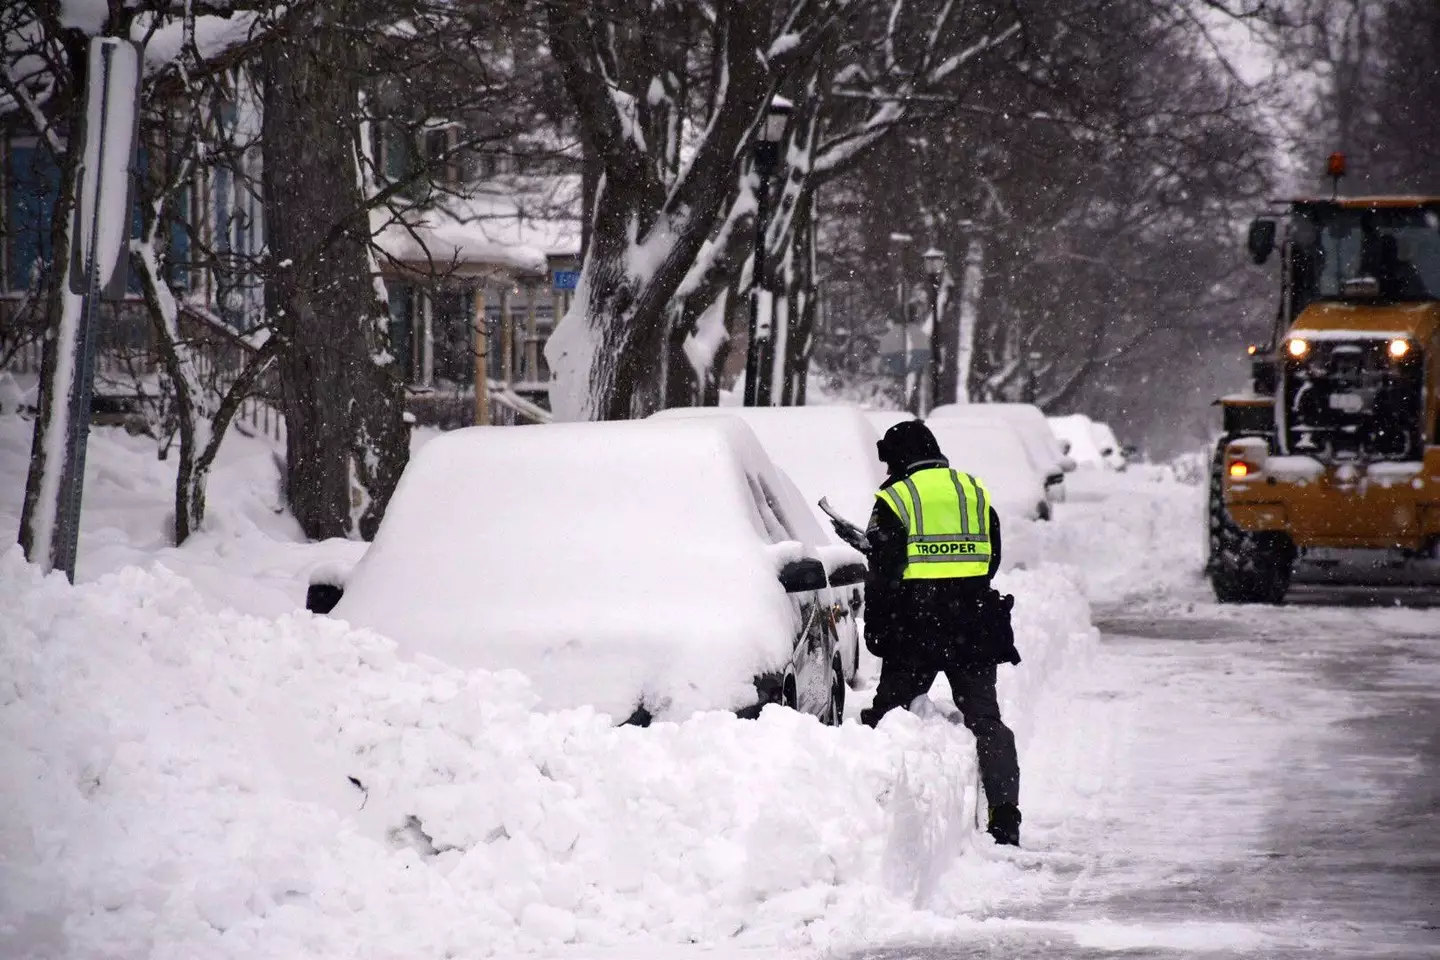 Snow disruption in Buffalo, New York on Boxing Day.